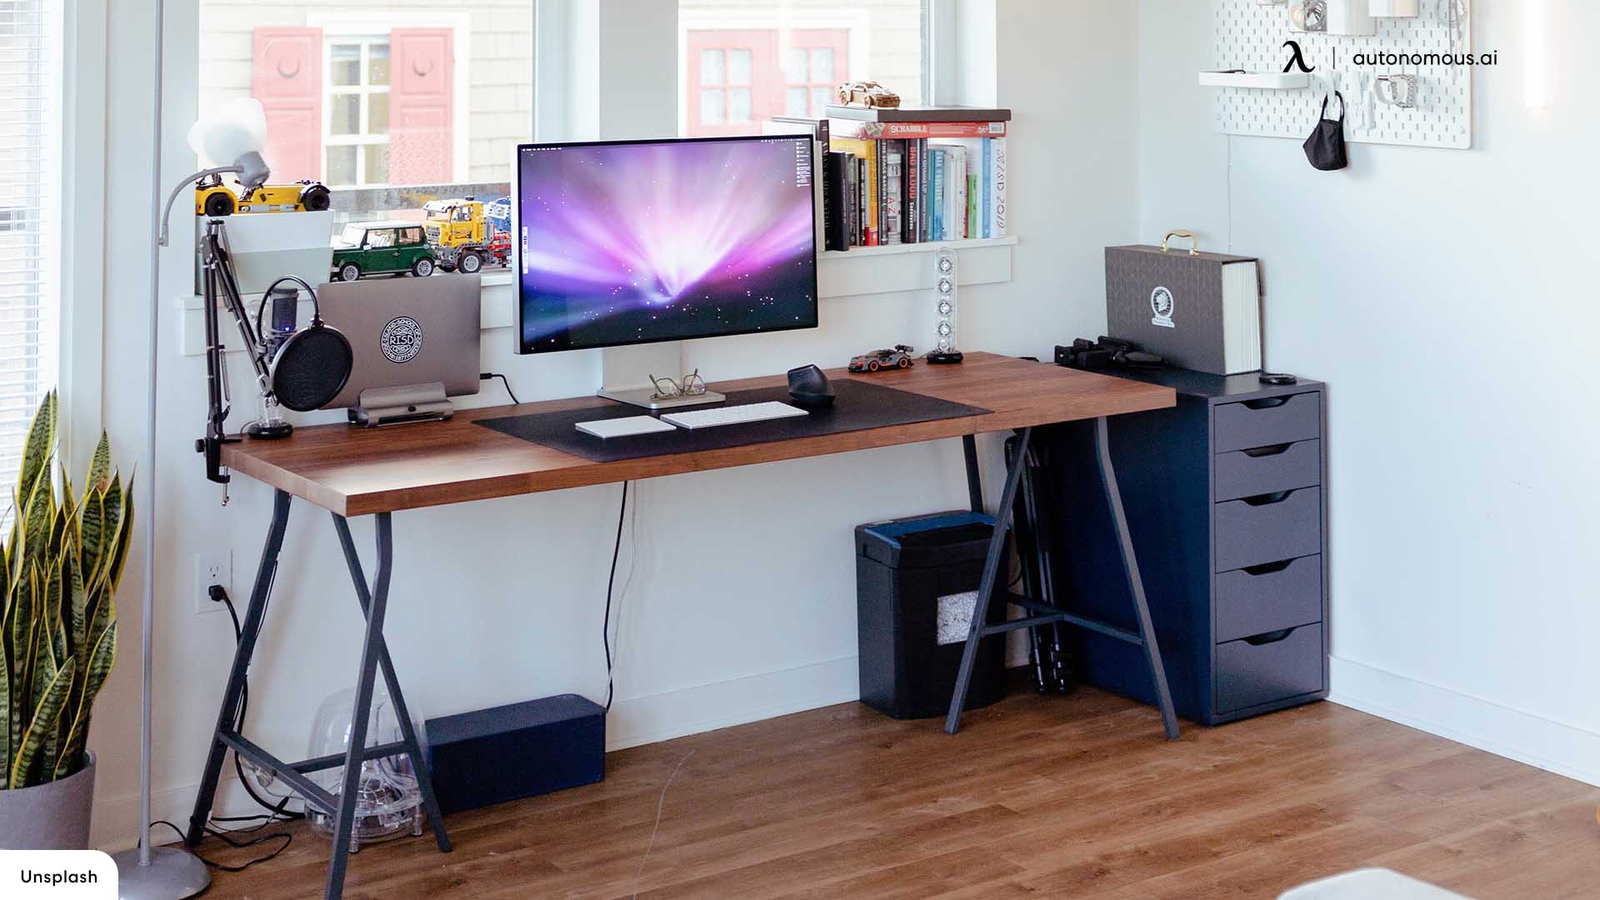 9 Home Desk Setup Ideas for Different Jobs: The Ideal Setup for Everyone